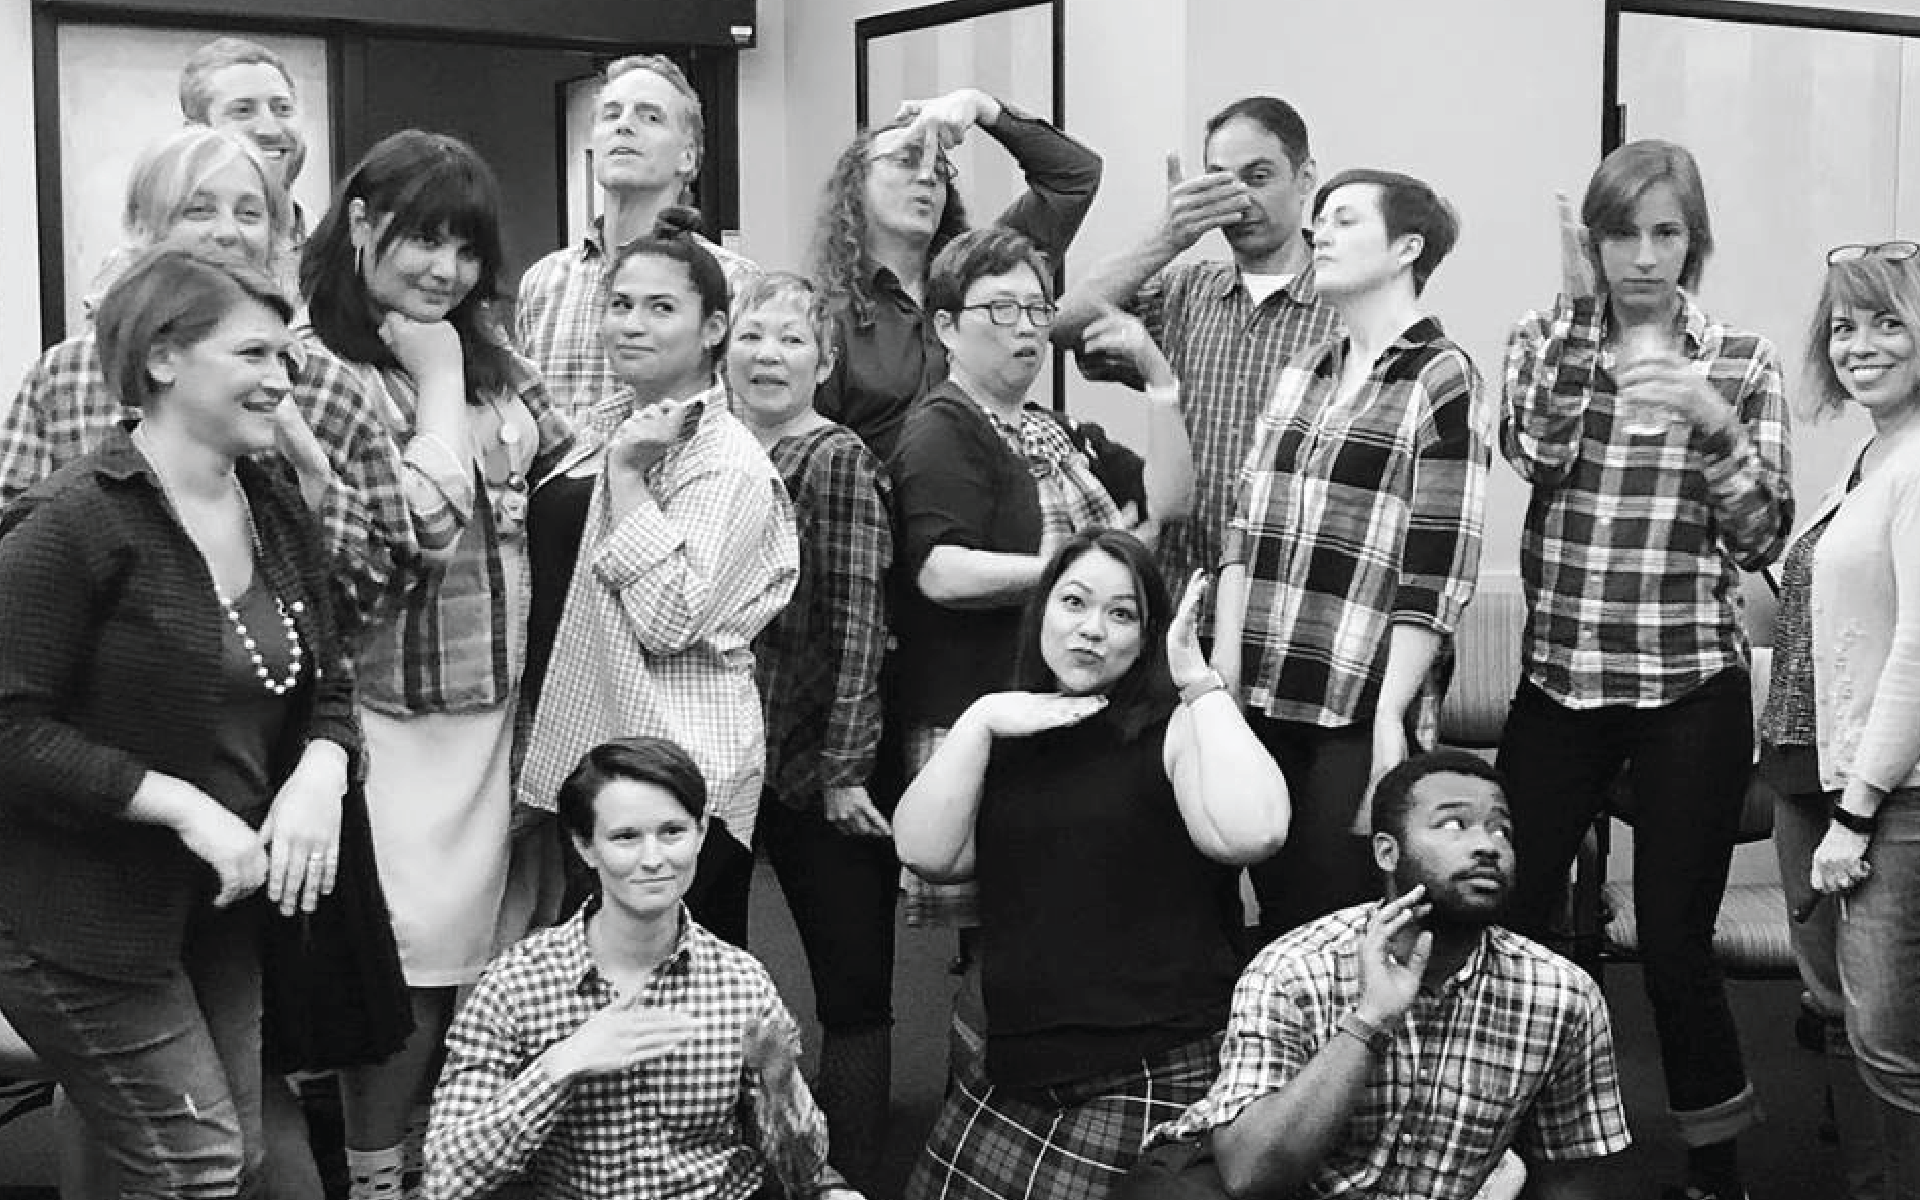 Photo caption: Meyer staff strike a pose wearing flannel, plaid and funny socks in commemoration of departing CEO Doug Stamm.